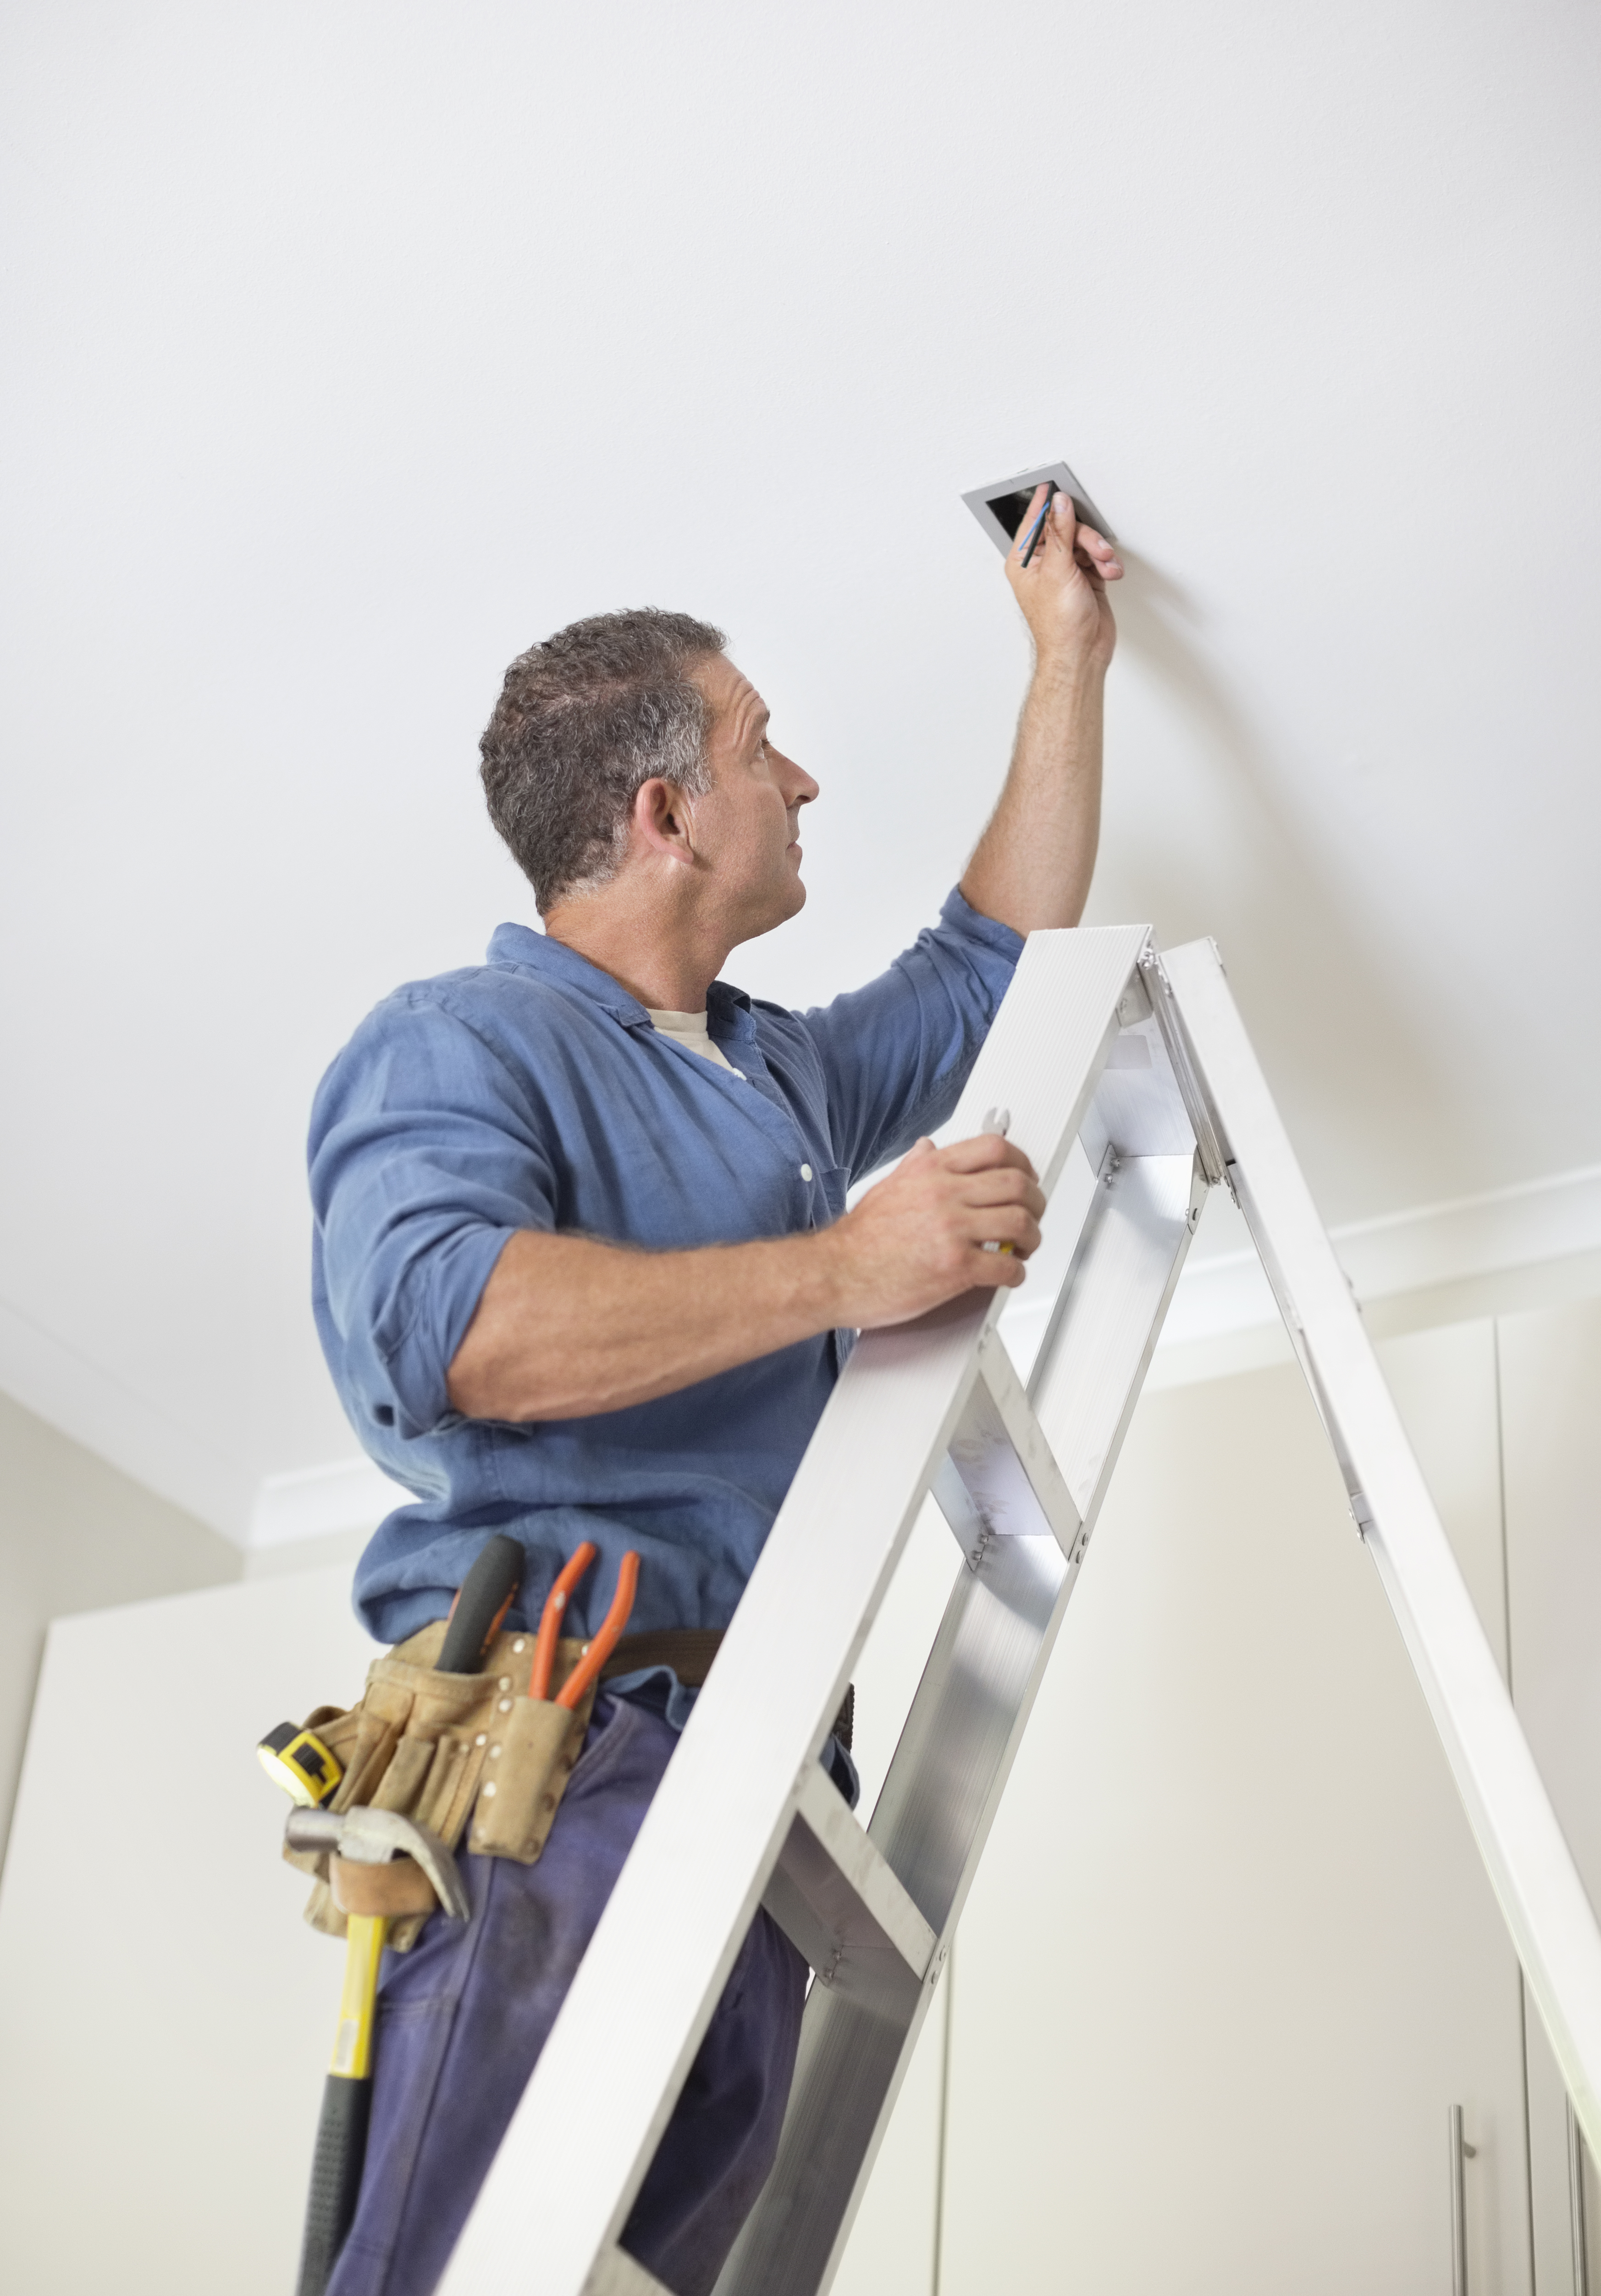 A skilled handyman is seen perched atop a ladder, meticulously working on installing a lighting fixture, demonstrating expertise and attention to detail in home